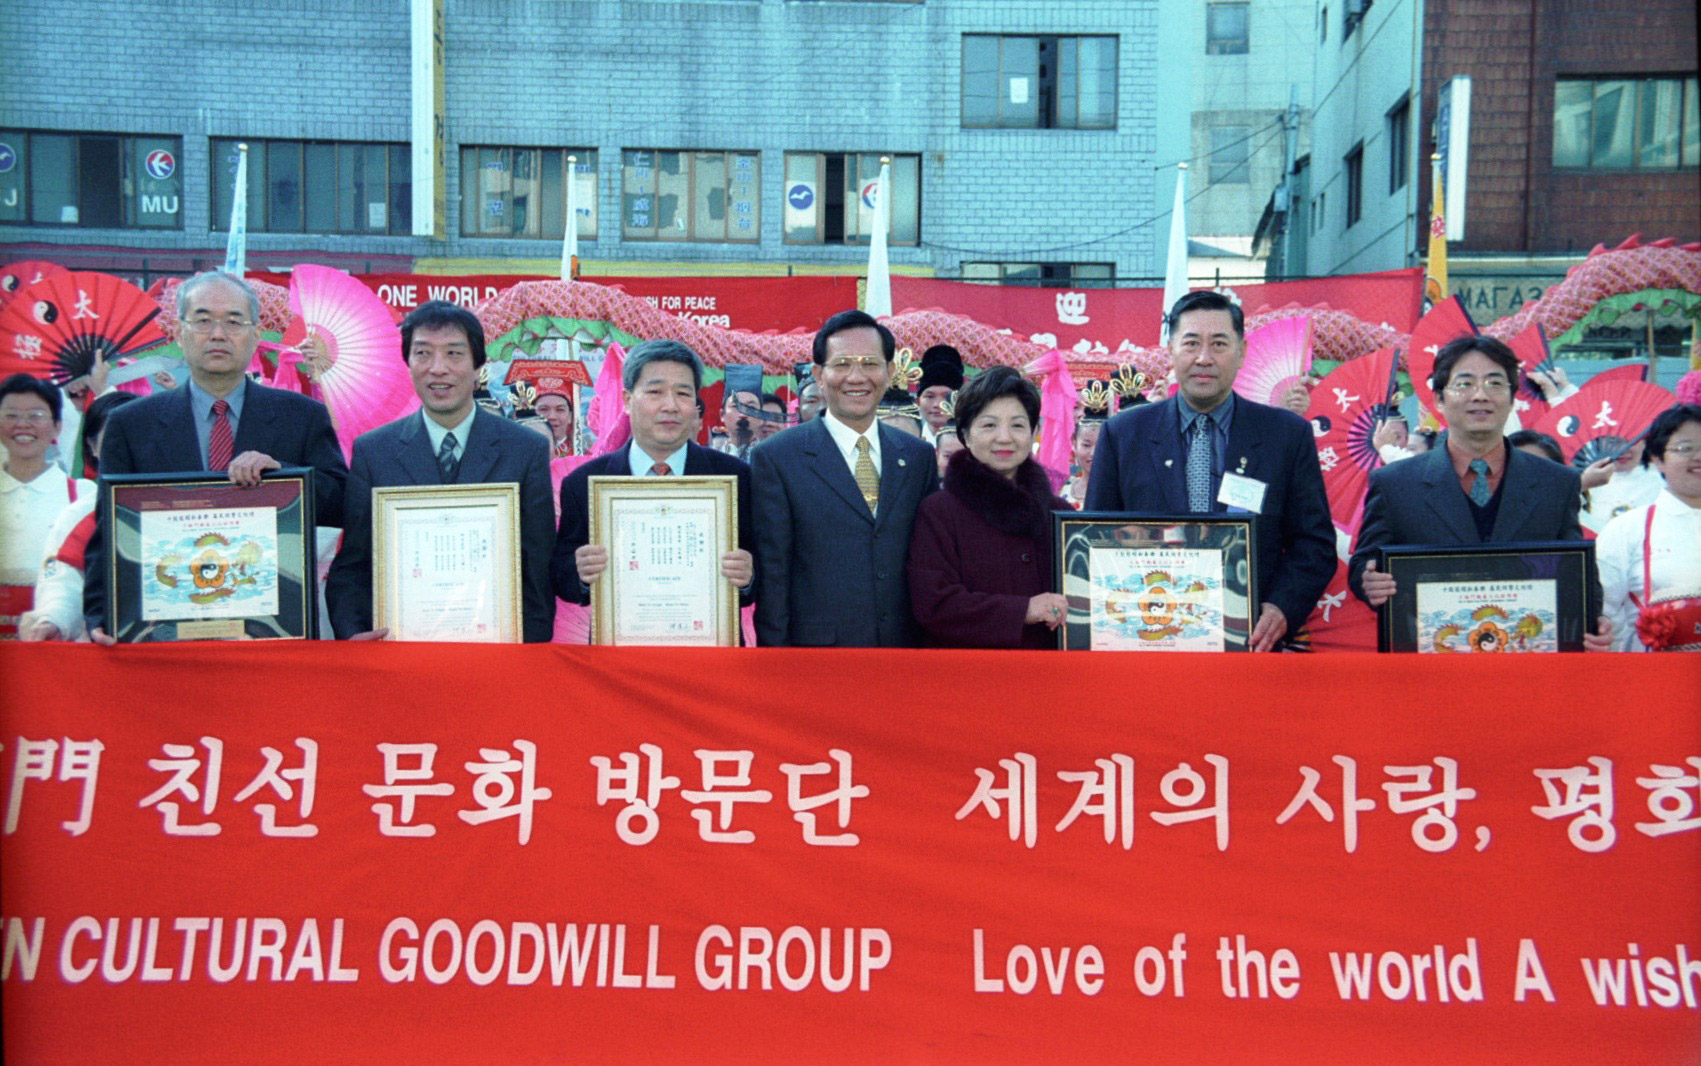 <b>World Peace Art Exhibition</b><br>
“Culture Goodwill Group of World Peace and Love” was awarded “Certificate of Merit- World Peace Art Exhibition” by former Secretary-General, Kofi Annan in 2000 during cultural exchange performance in South Korea. <br>Nov. 2000, South Korea